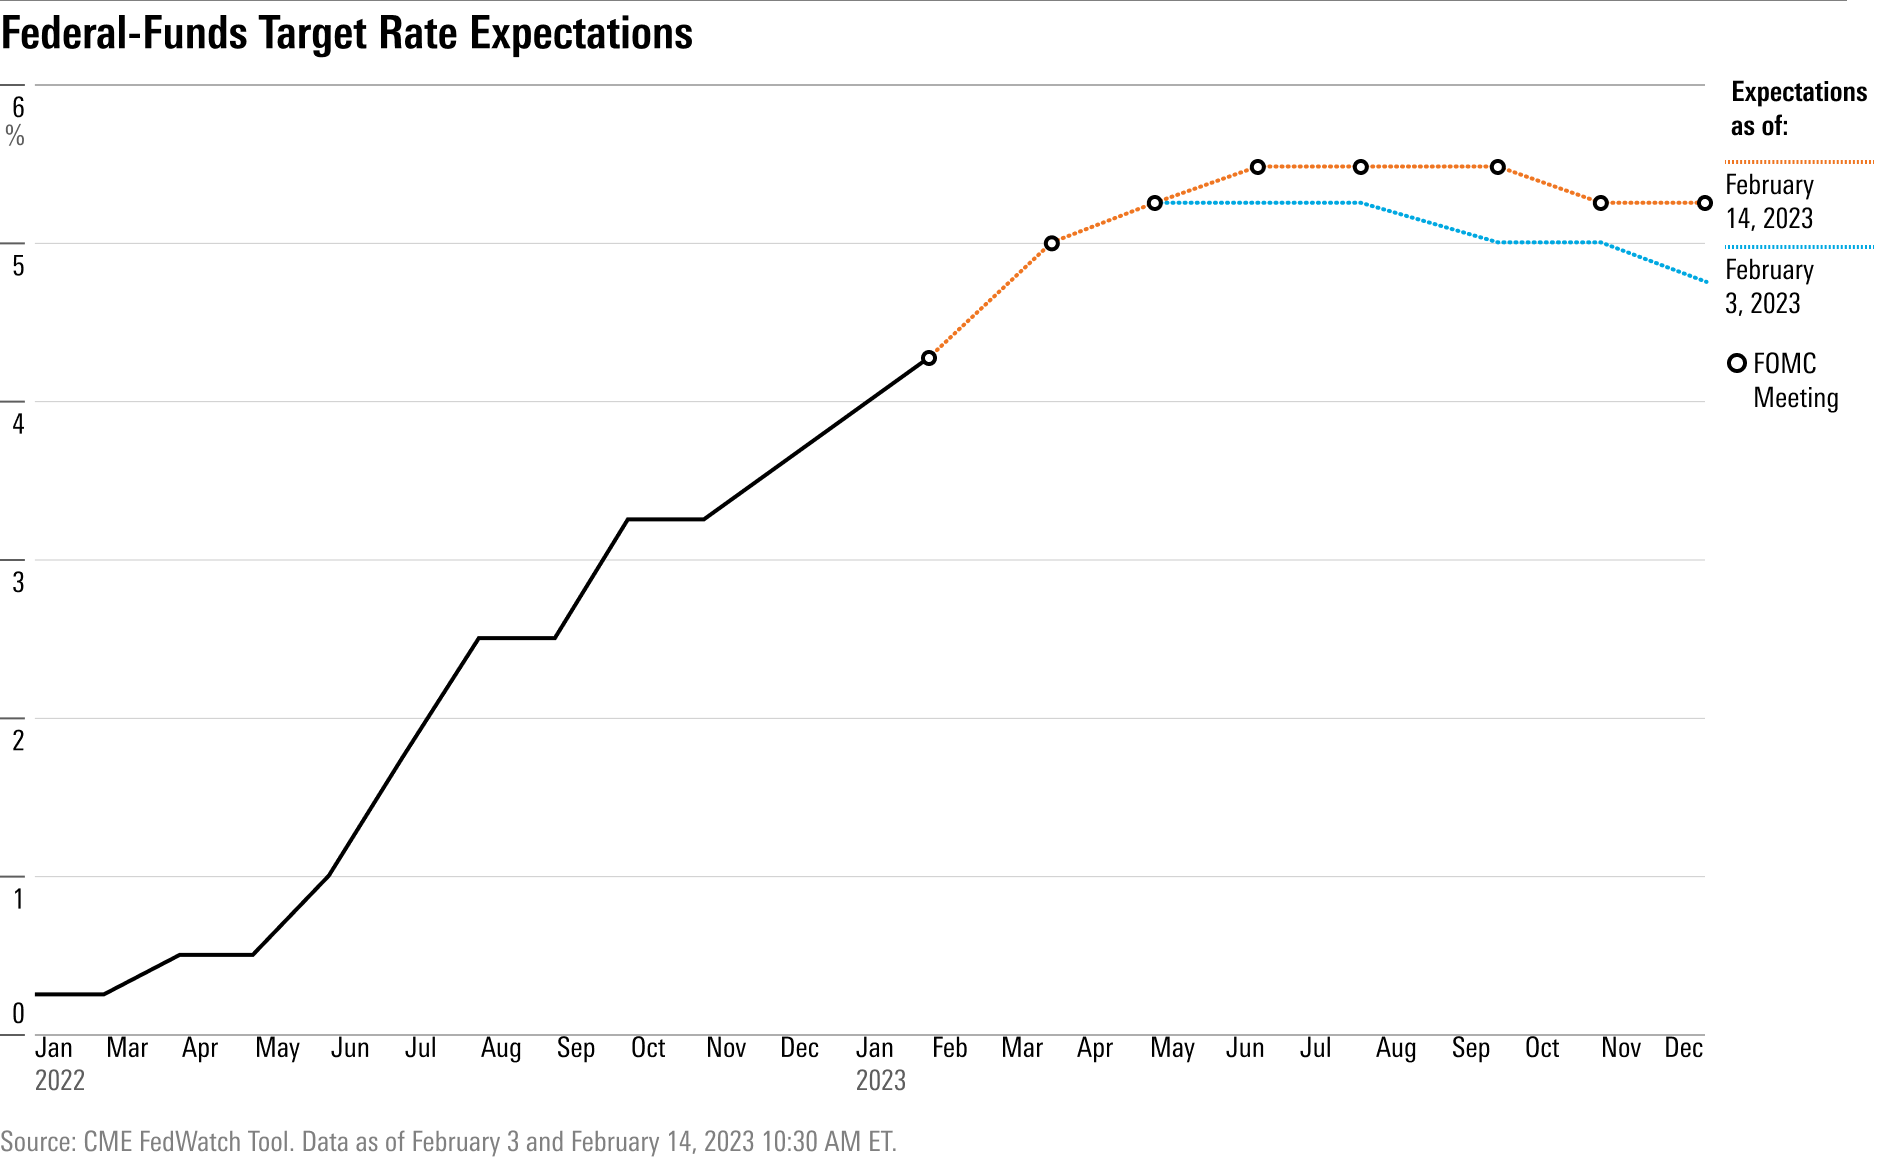 Futures-market expectations for the federal-funds effective rate through 2023.